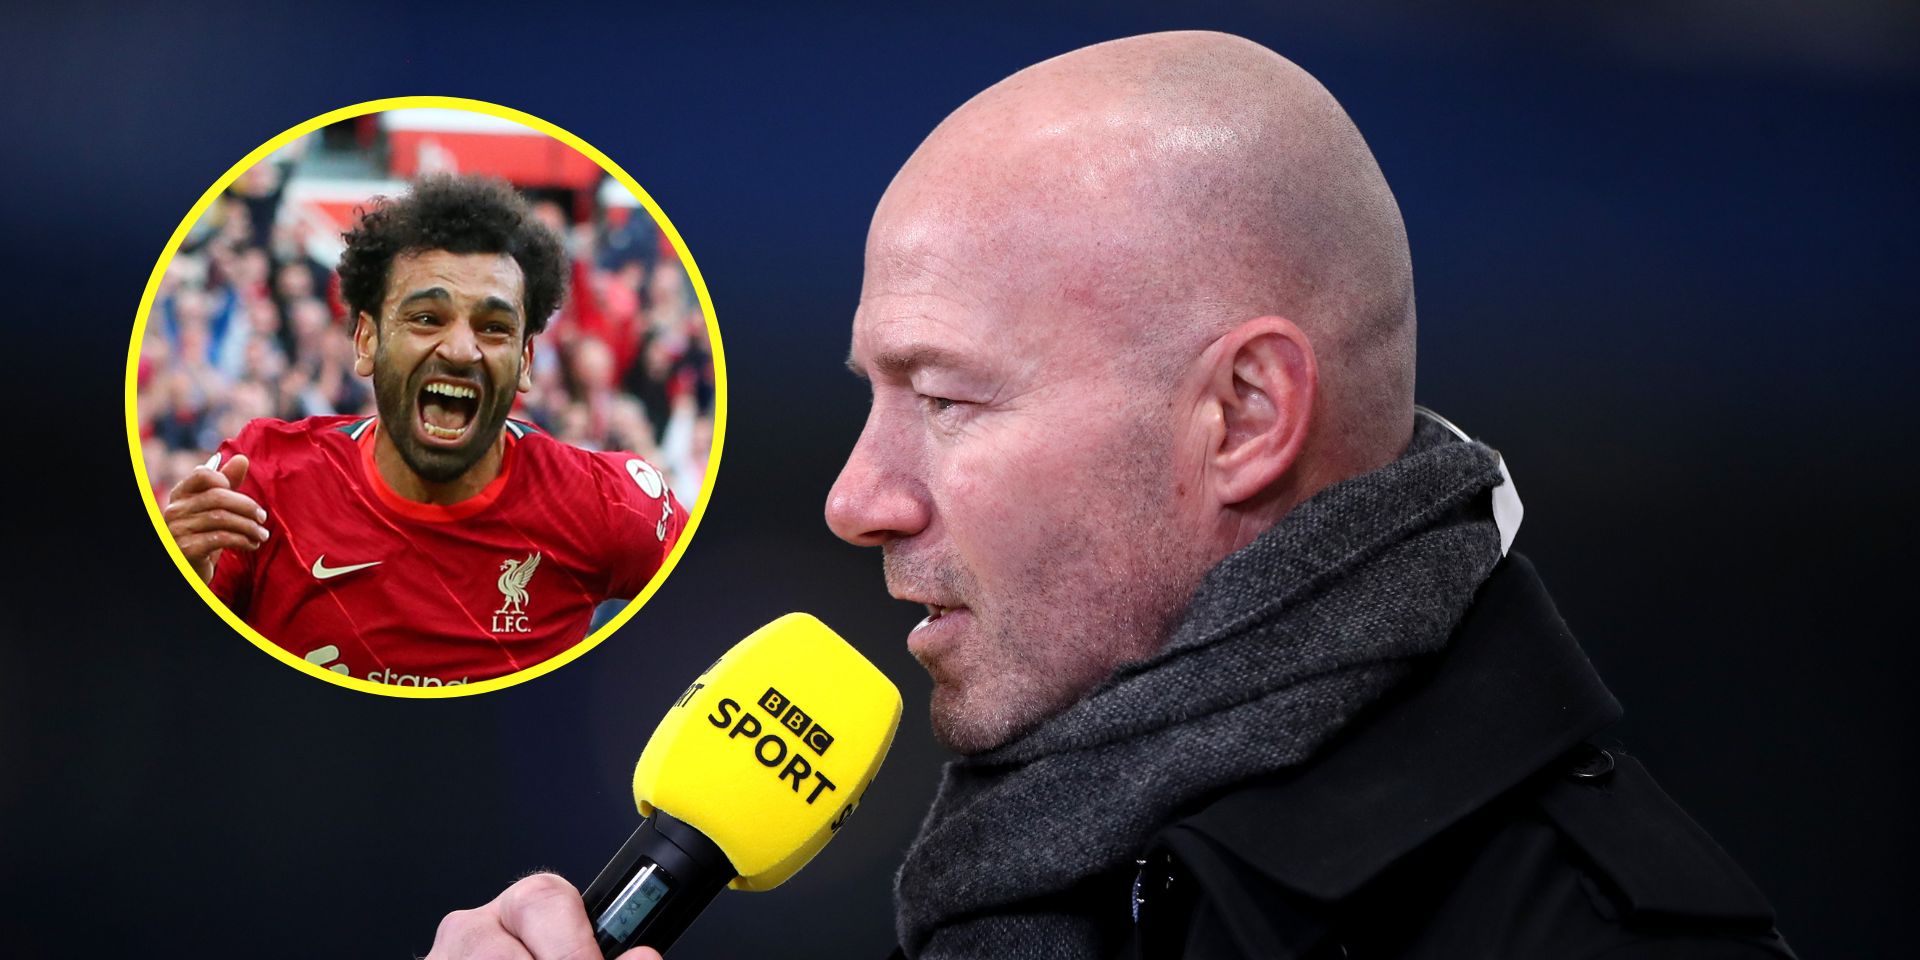 Shearer says Liverpool have done something that will make them ‘frightening’ this season